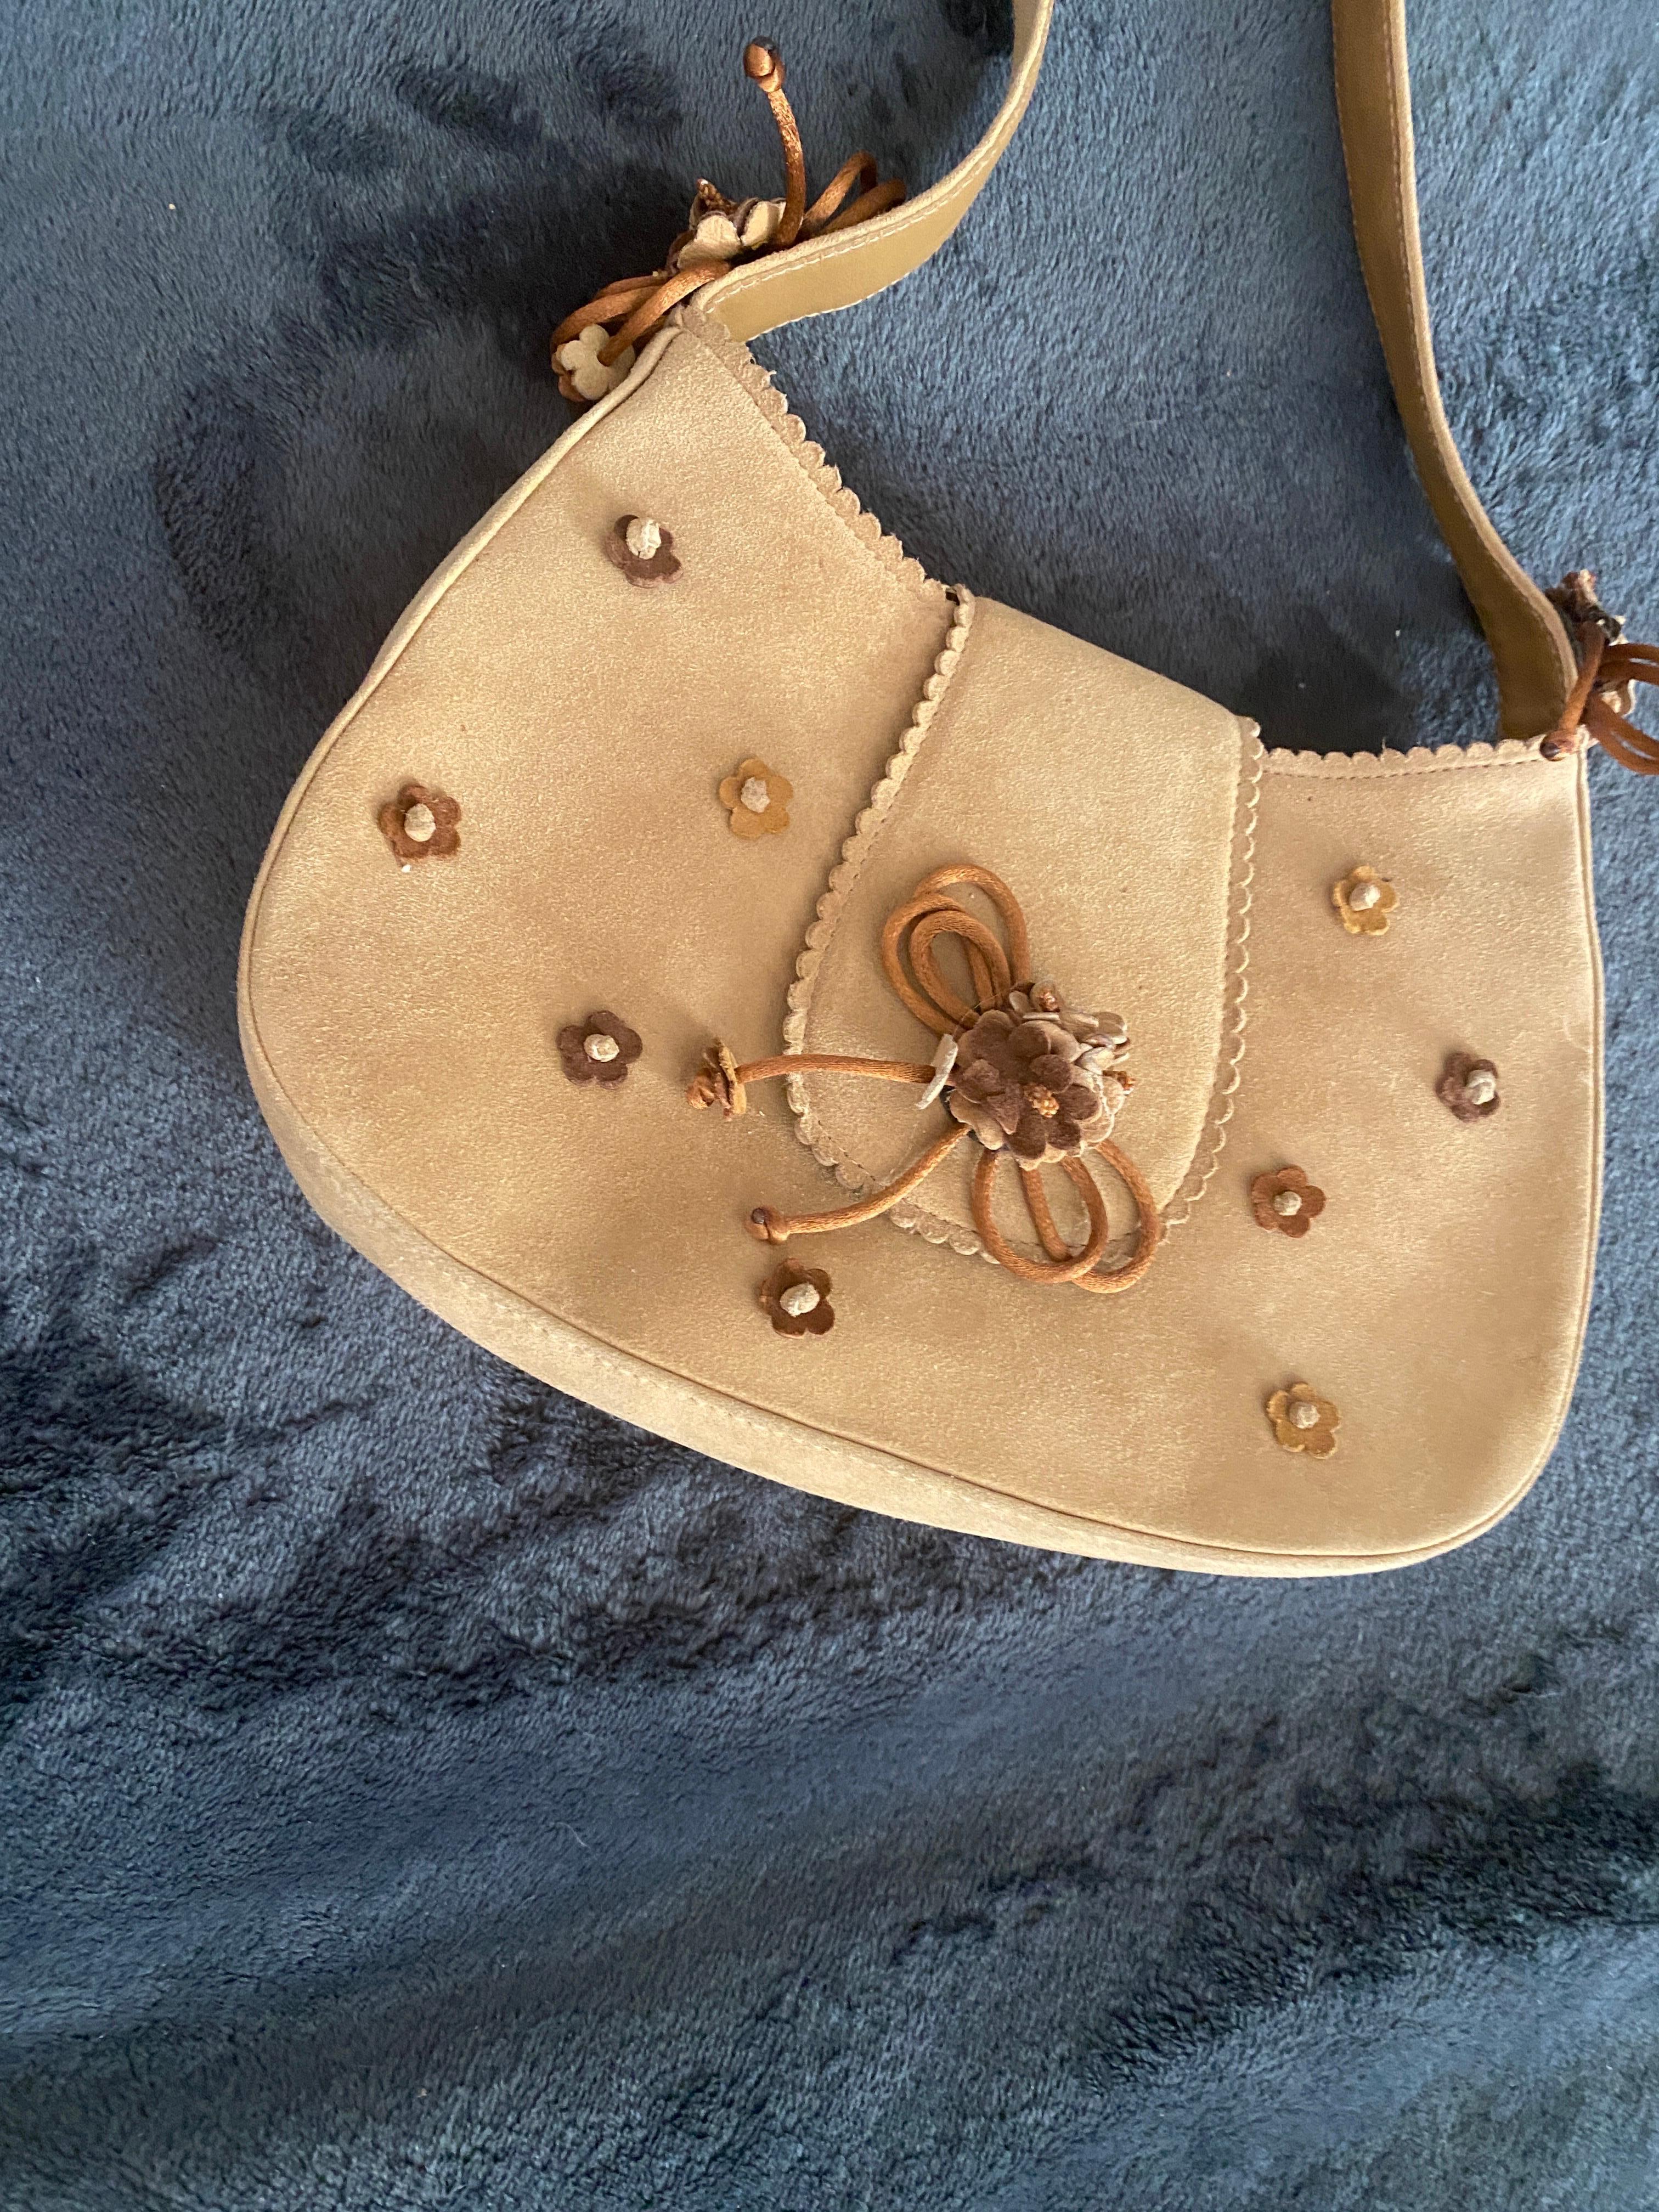 This vintage Stuart Weitzman made in Spain. handbag was purchased from my Palm Springs estate and found in the drawer on used since it was purchased new in NYC. The handbag suede color is hard to photograph correctly. It is a neutral, go with